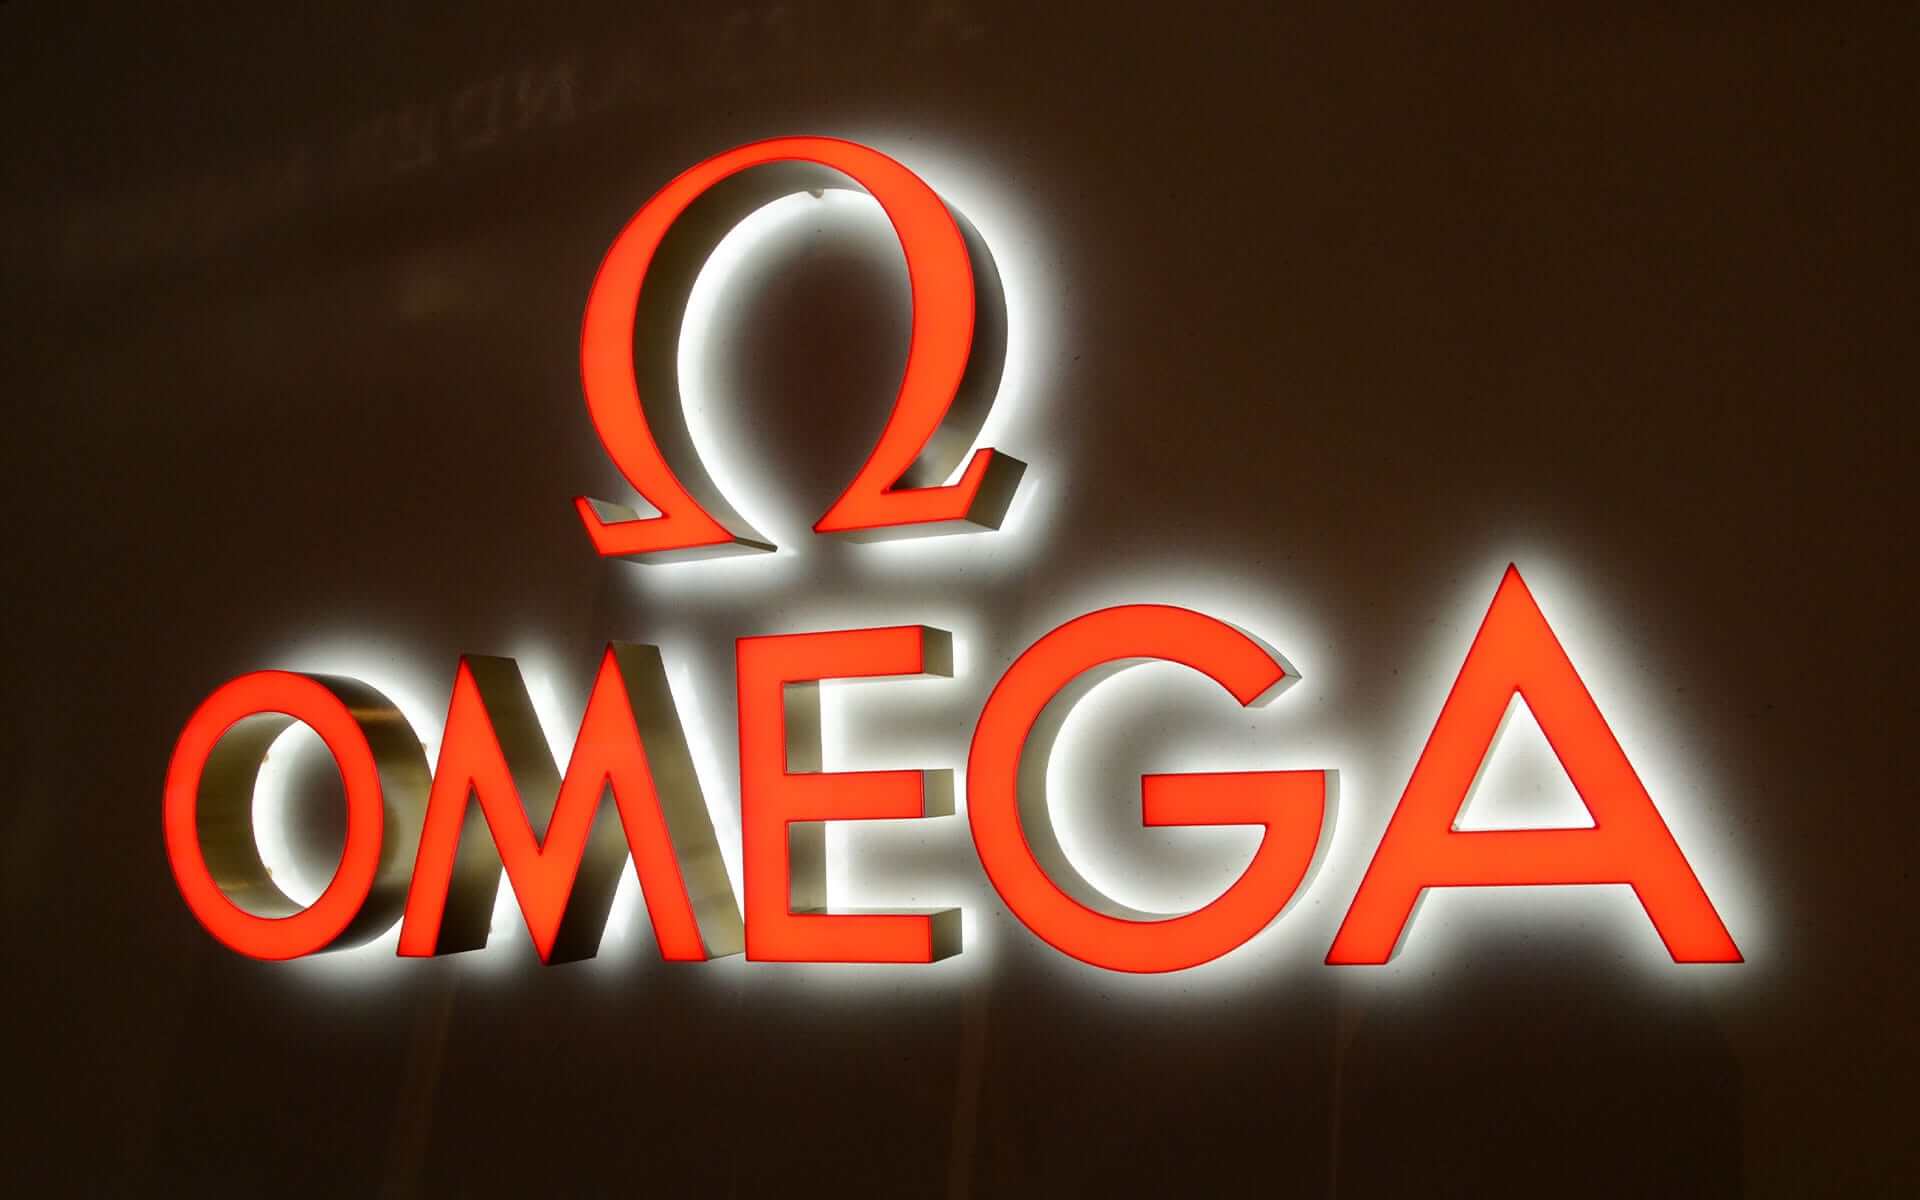 Face and Back-lit Metal Channel Letters for Omega